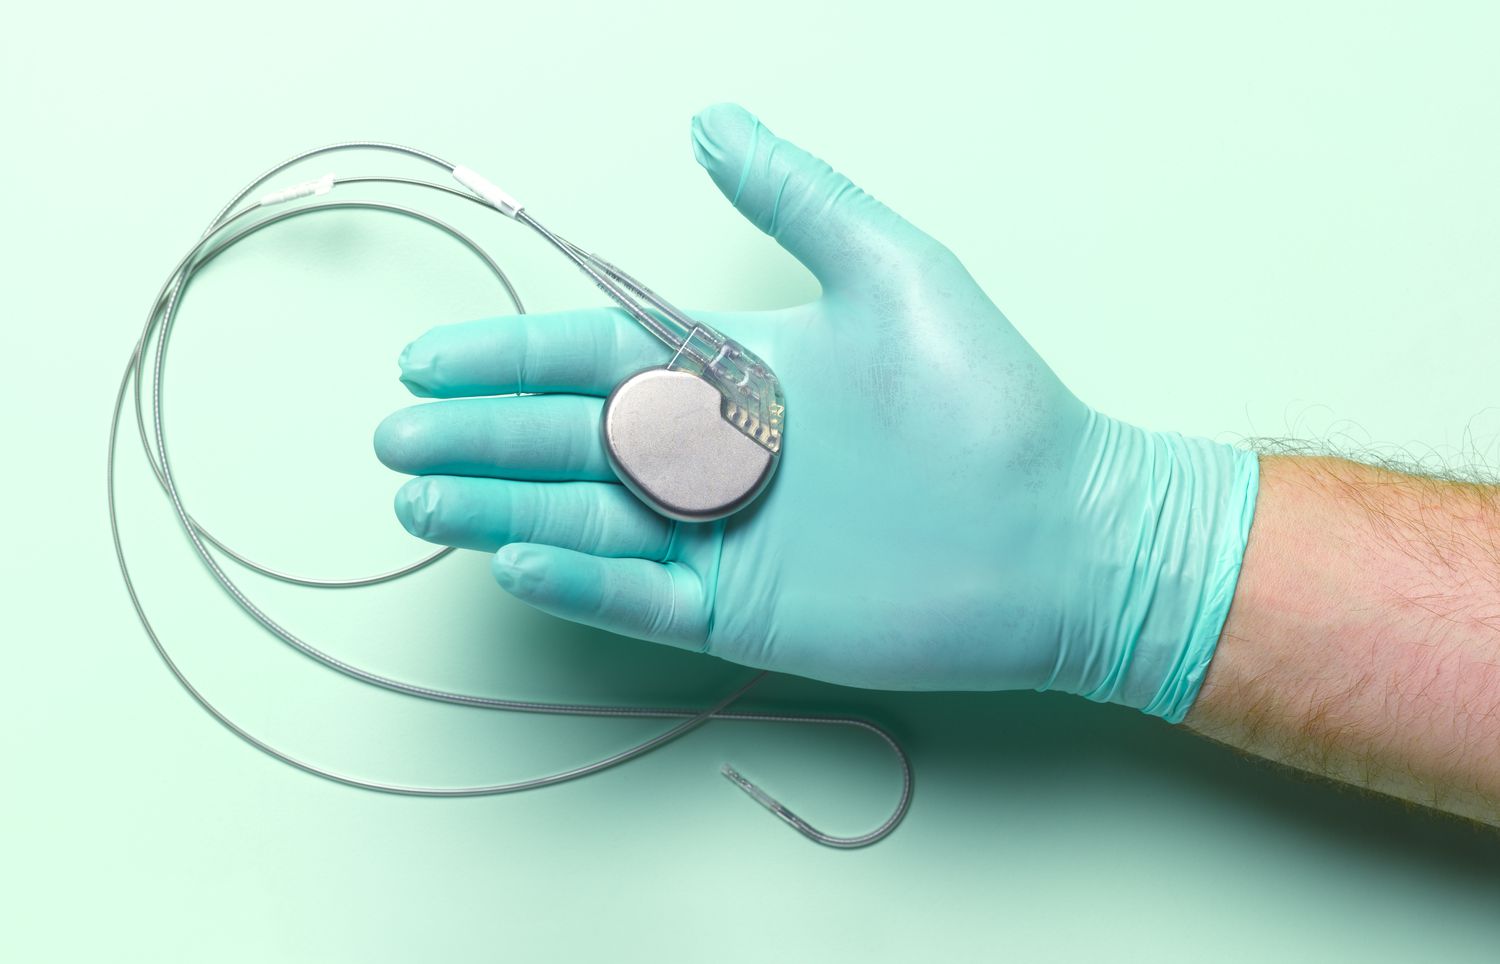 Future Prospects of the Active Implantable Medical Devices Market